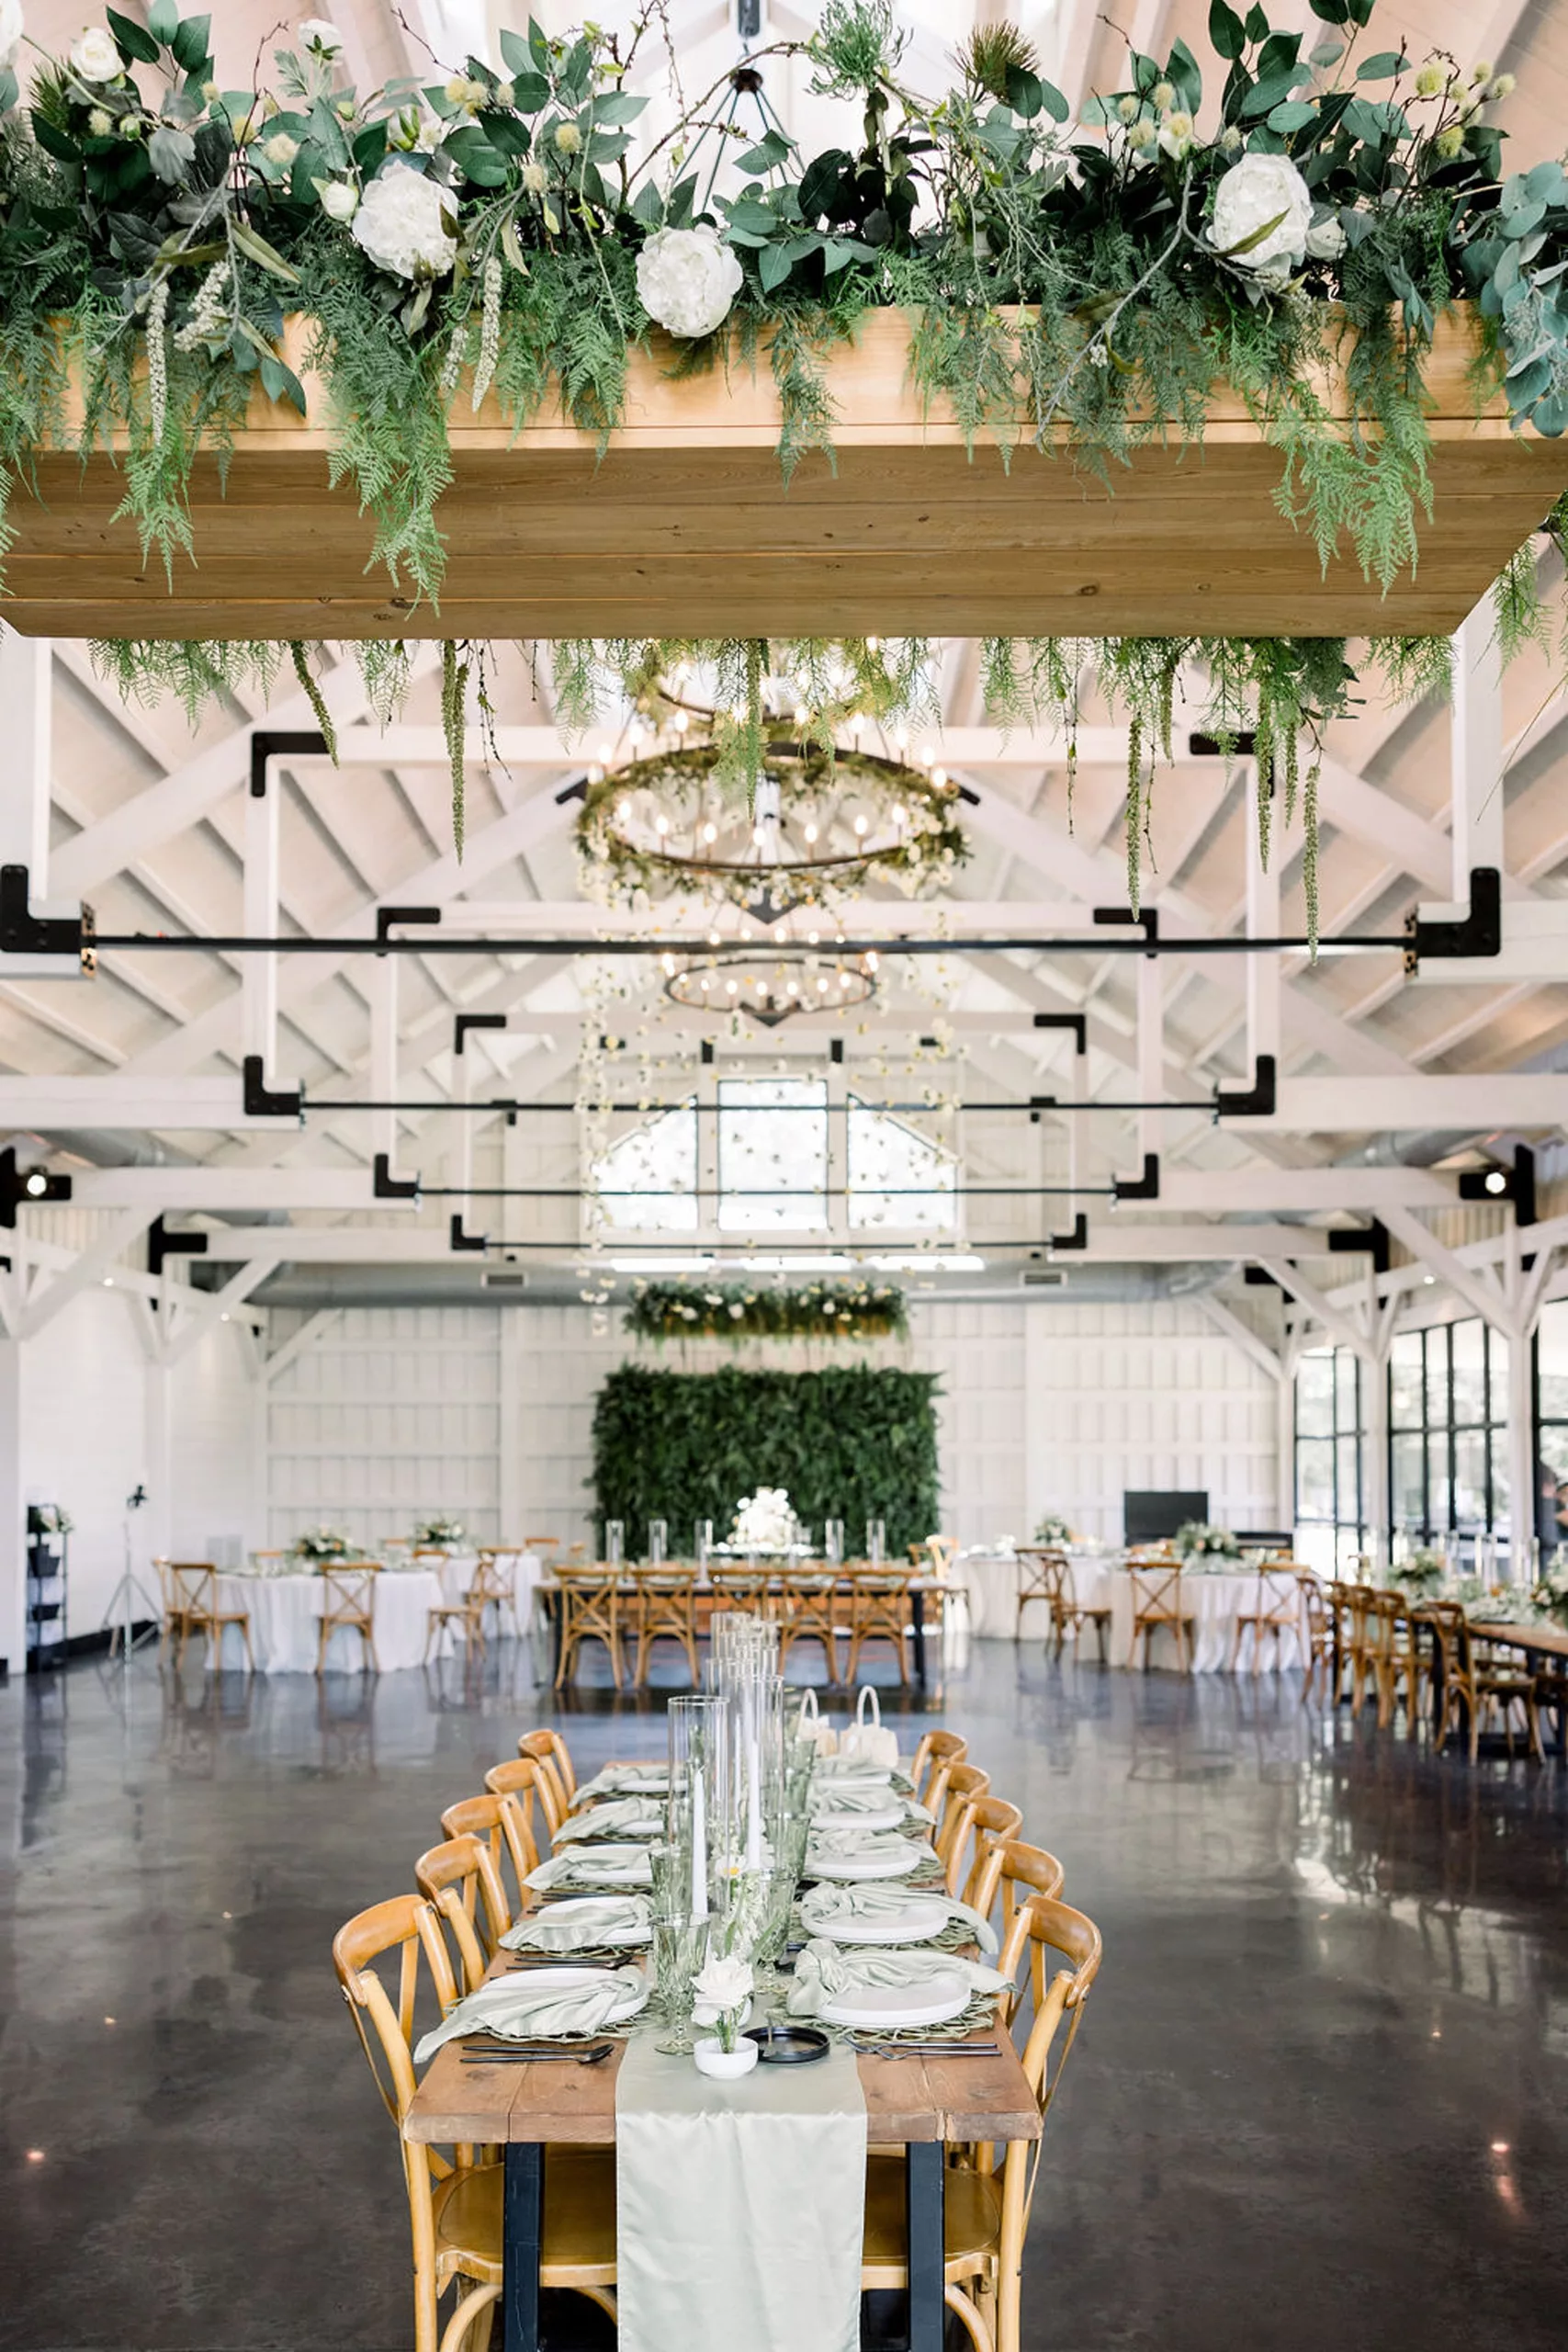 Details of a wedding venue set up with long tables and wooden chairs and white florals